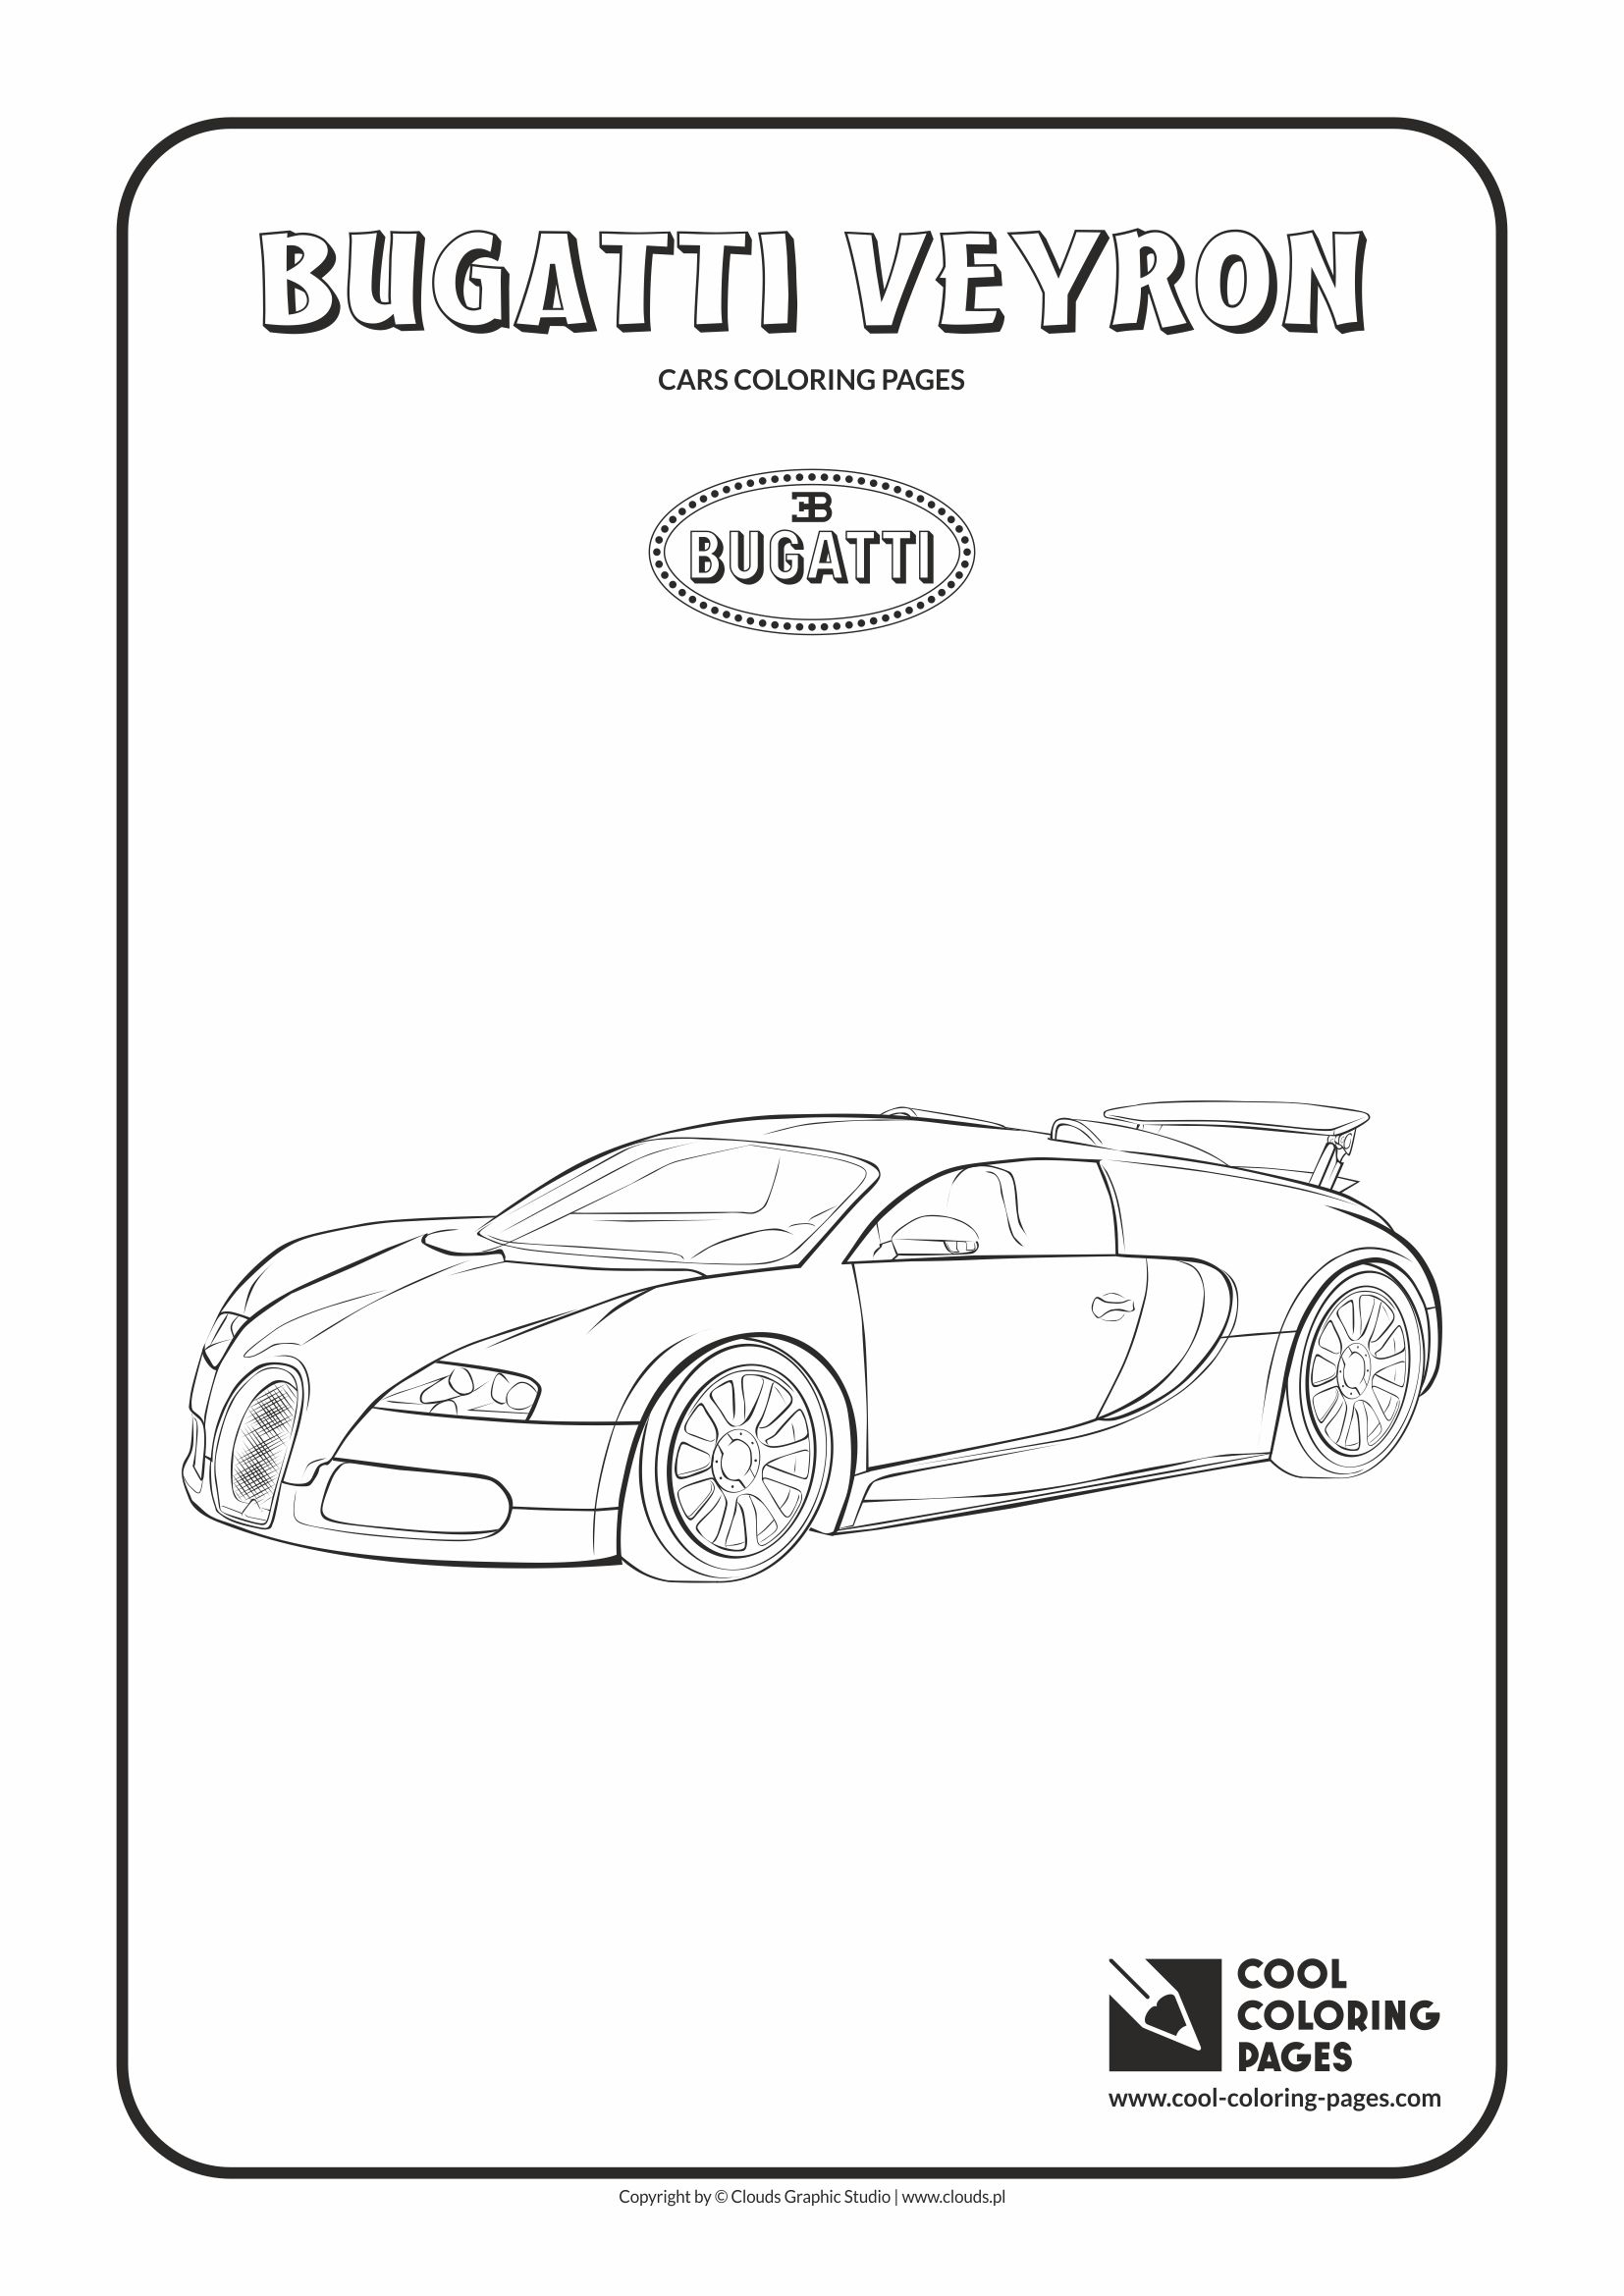 Cool Coloring Pages - Vehicles / Bugatti Veyron / Coloring page with Aston Bugatti Veyron